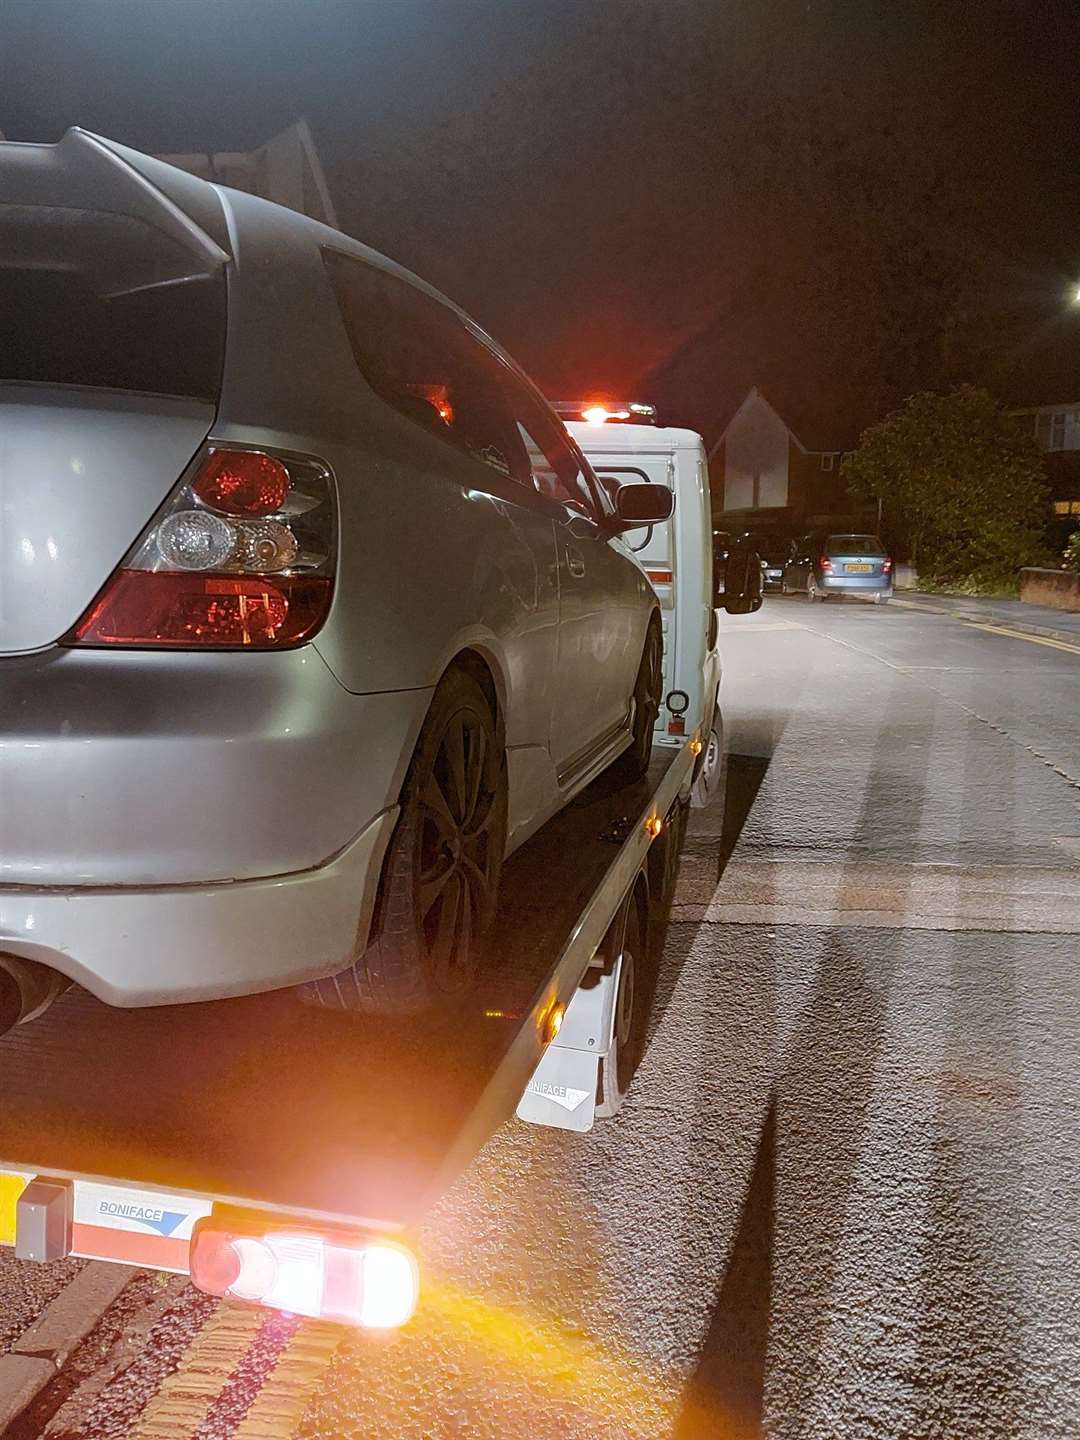 The Honda Civic was seized after officers discovered the driver had no insurance. Photo: @KentPoliceAsh